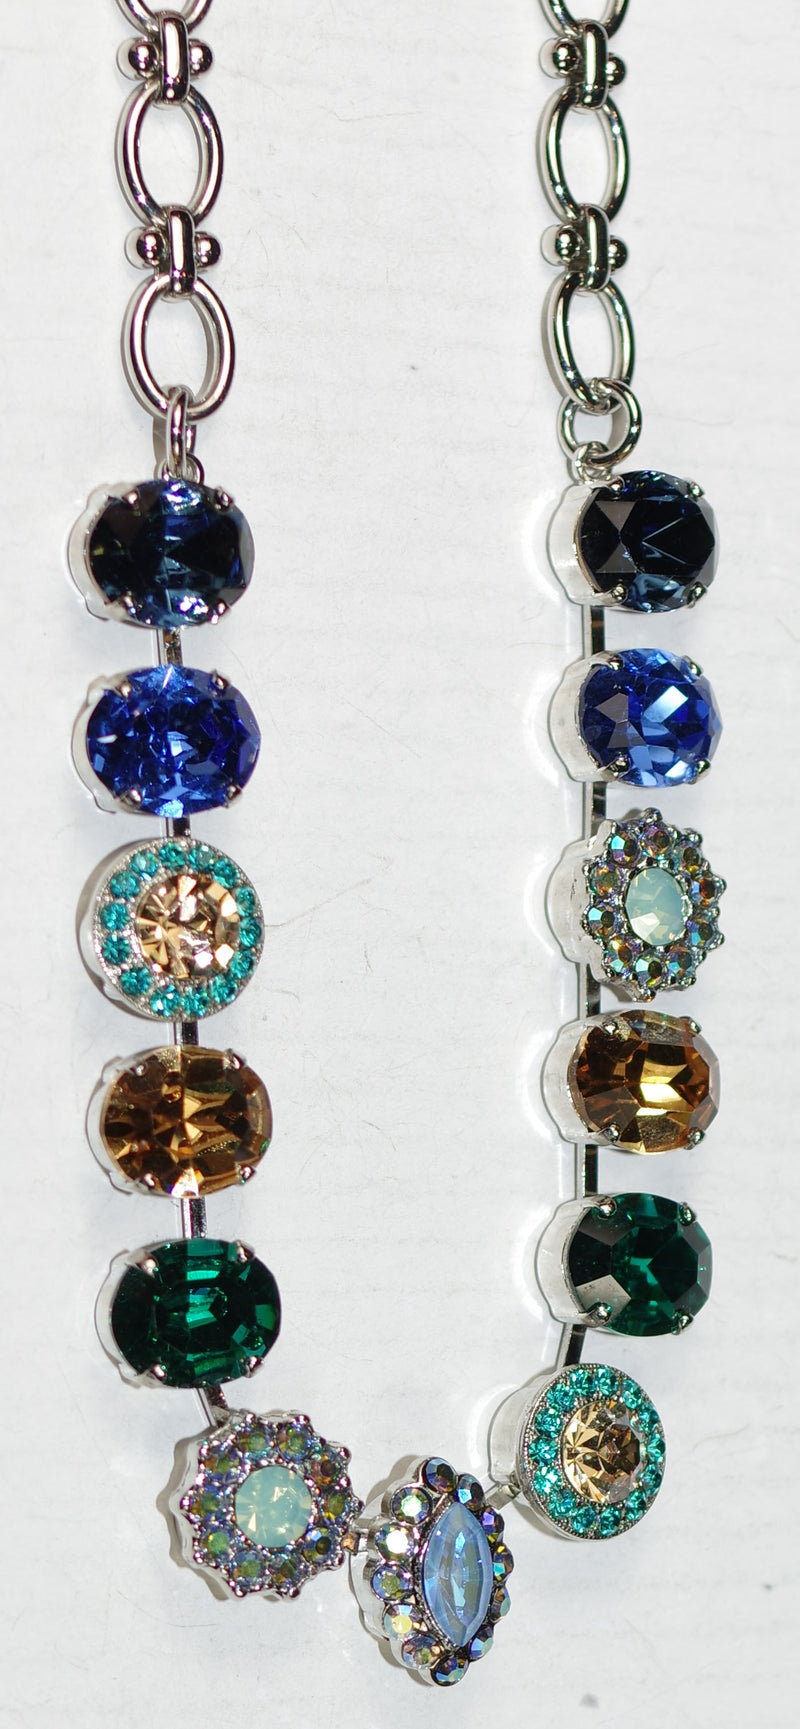 MARIANA NECKLACE FAIRYTALE: blue, amber, teal, pacific opal stones in silver rhodium setting, 21" adjustable chain